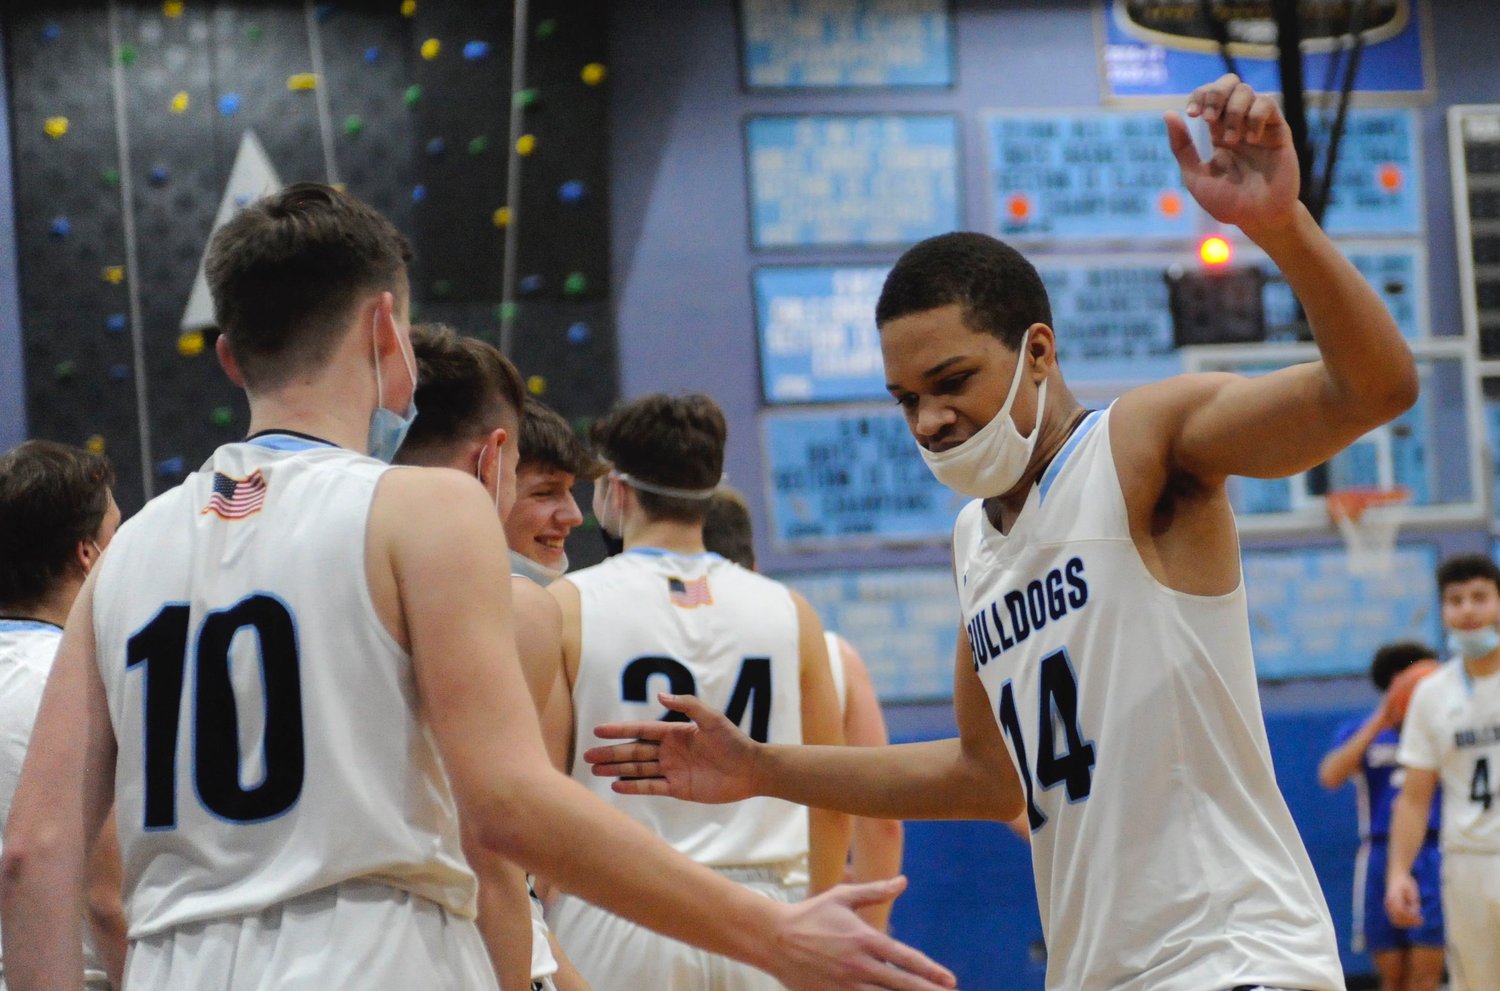 A “high five” on the lowdown. Sullivan West’s Ray Jones closed out the Bulldogs’ scoring with a “three” at the final buzzer. He was congratulated by his teammates including Matthew DuBois (pictured).